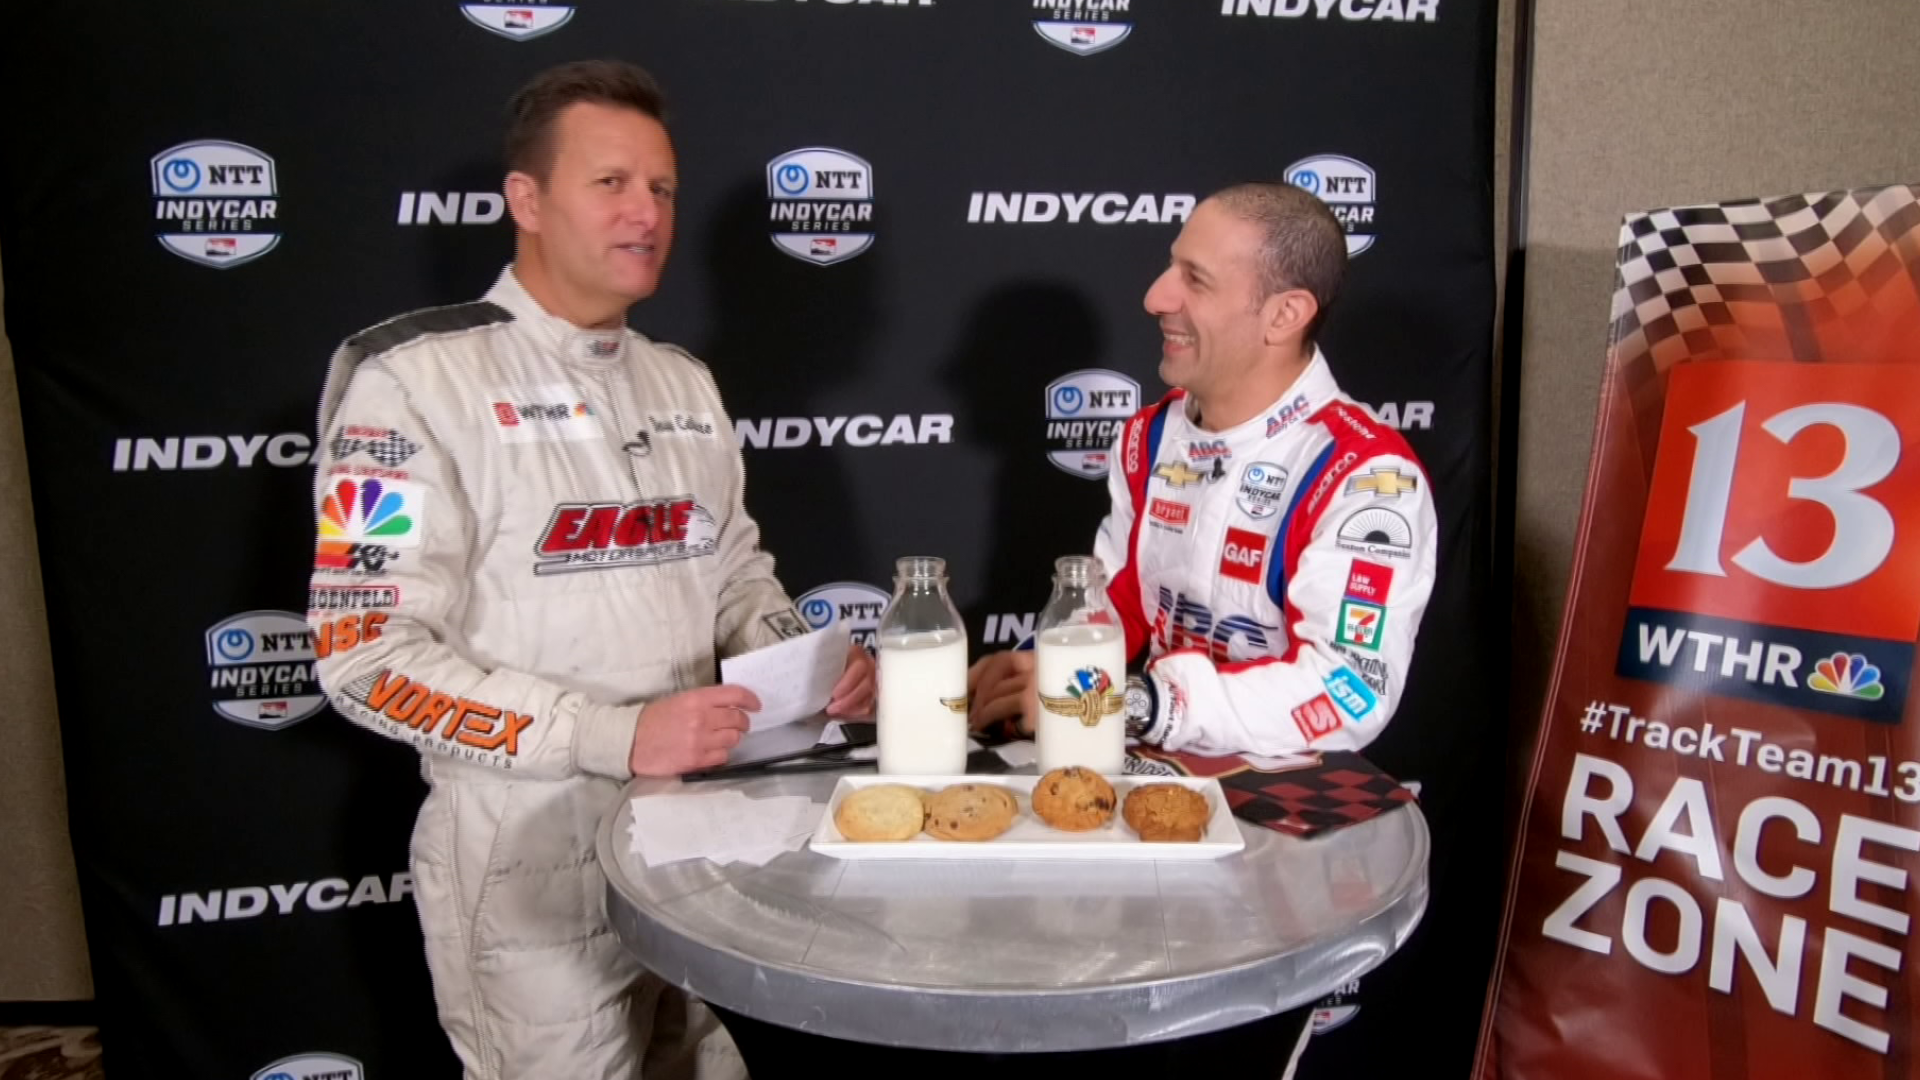 Before it was a bad idea to share food, Dave Calabro pulled out the milk and cookies for a chat with IndyCar drivers.